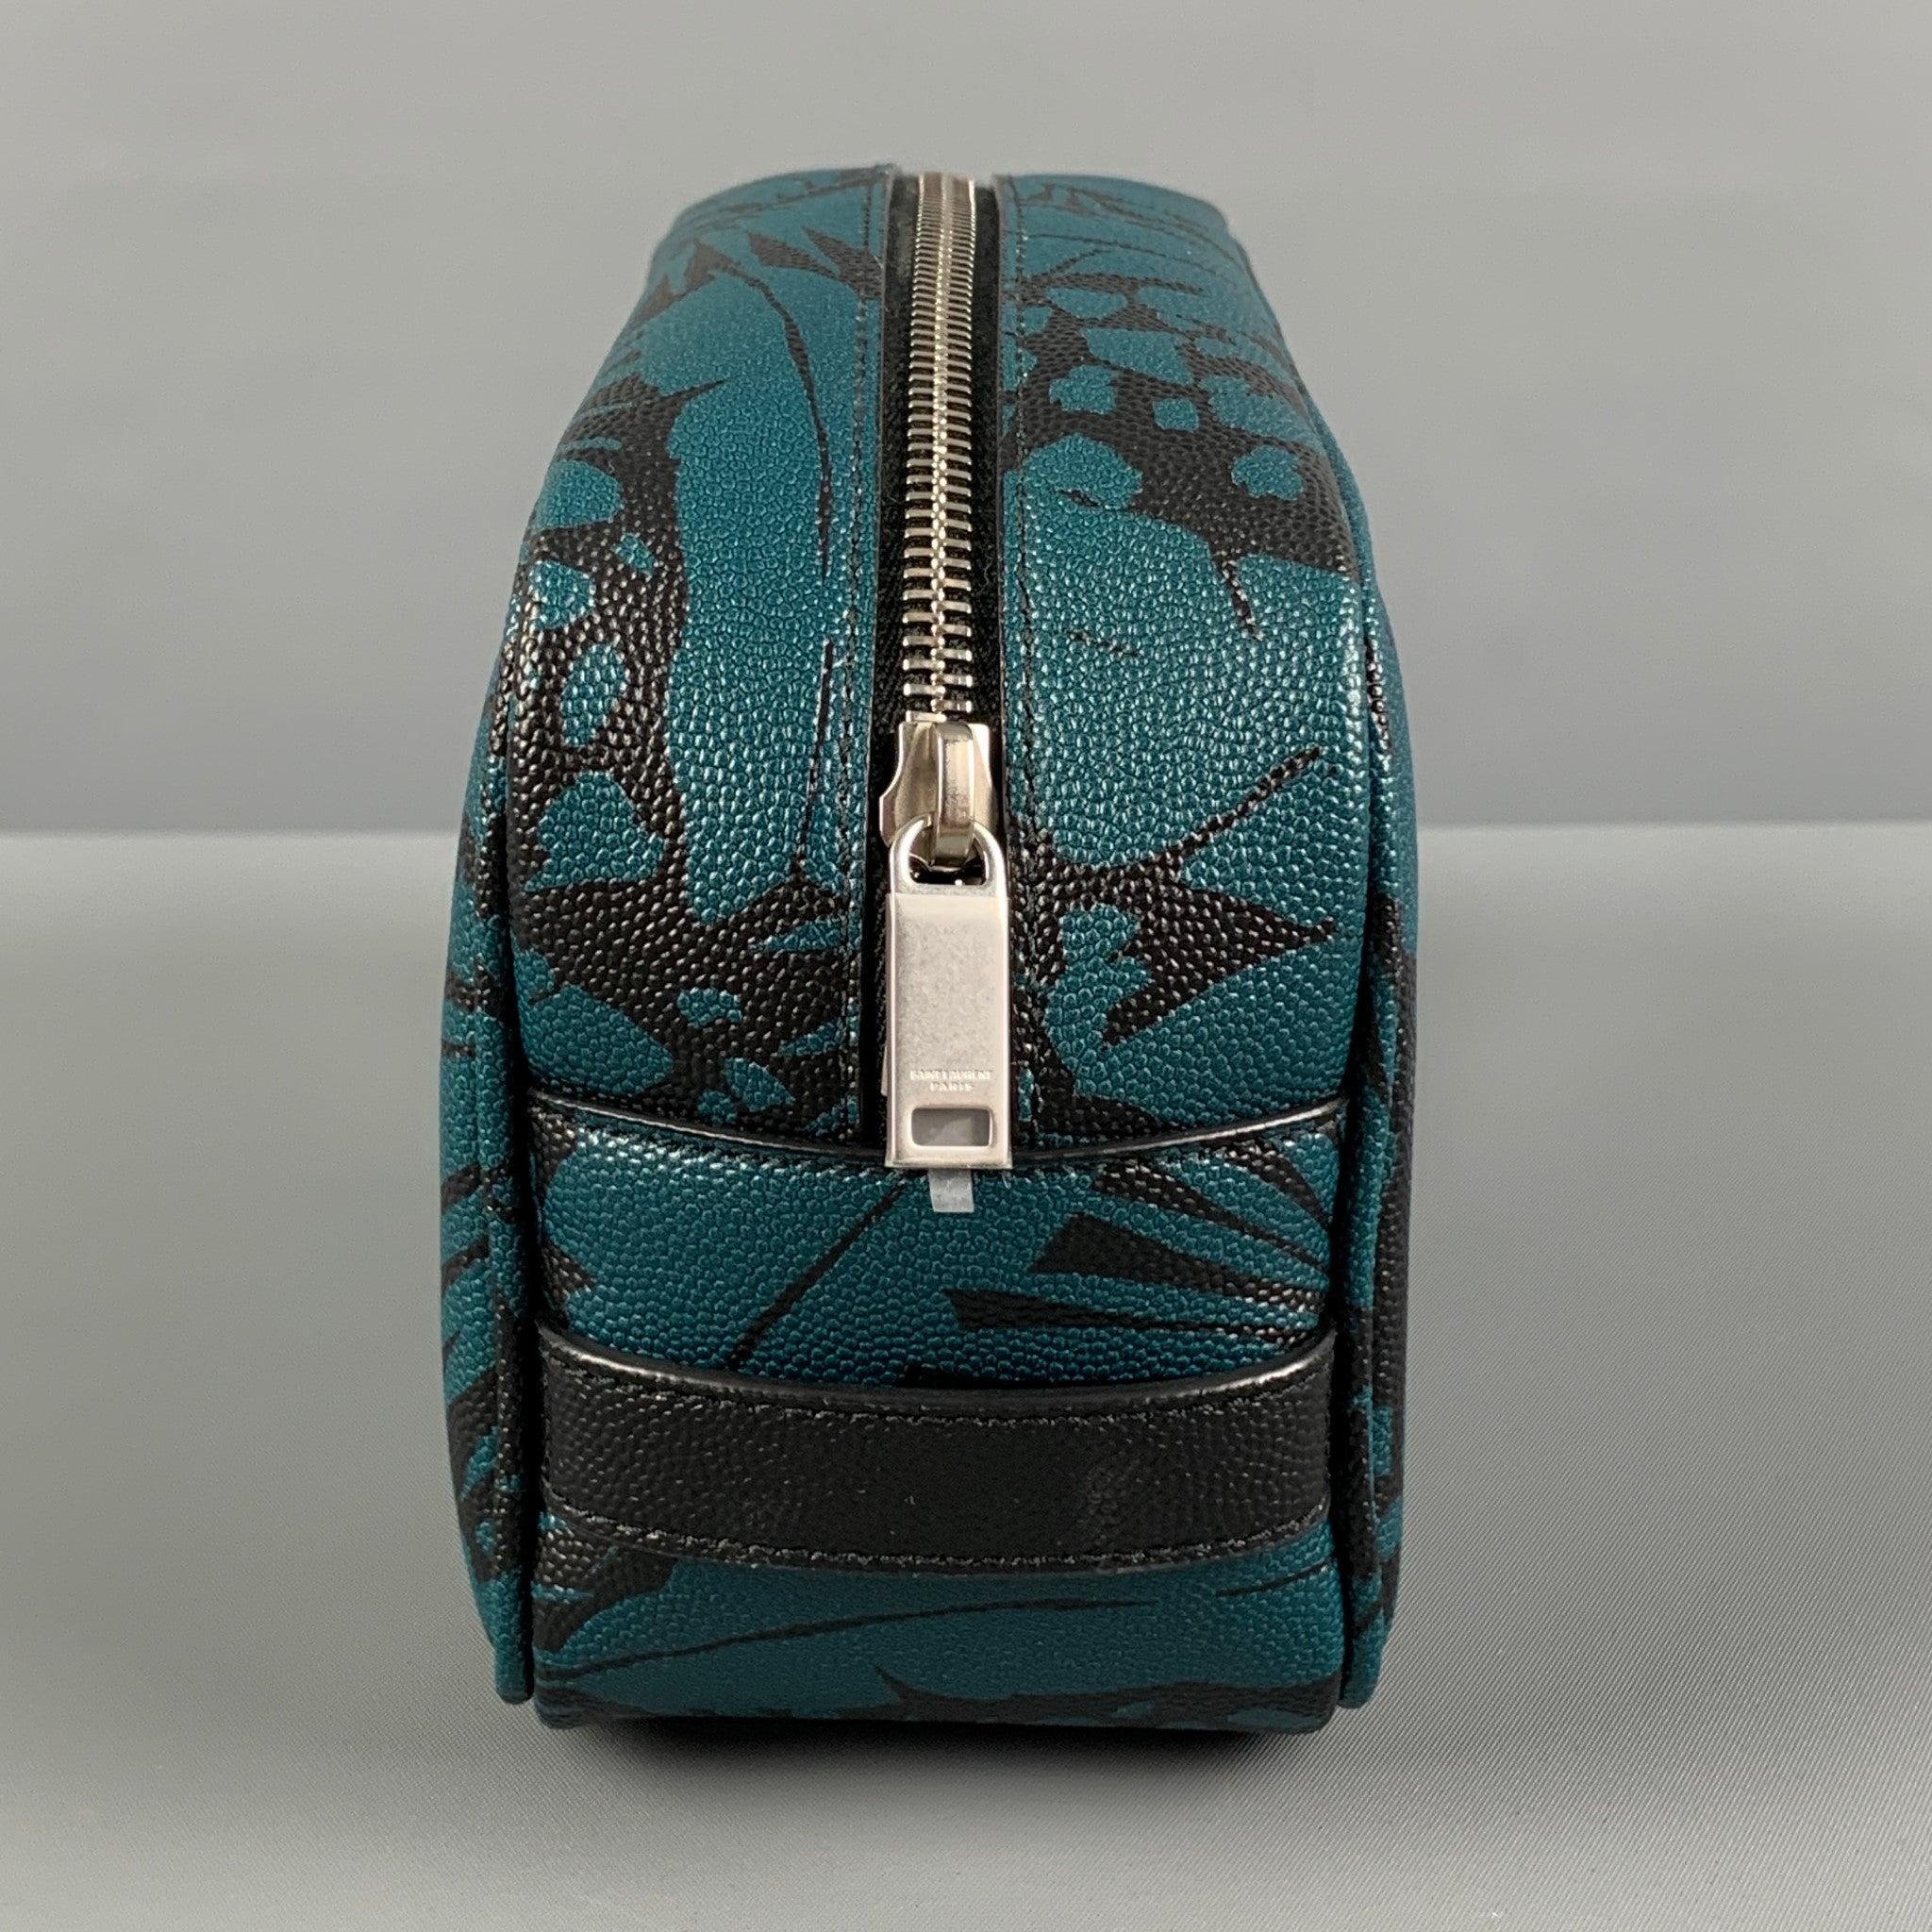 SAINT LAURENT toiletry bag comes in a teal & black leaf print canvas material featuring a top zipper closure. Made in Italy. Excellent
Pre-Owned Condition. 

Marked:   GUE650125-0621 

Measurements: 
  Length: 8 inches  Width: 3.25 inches 